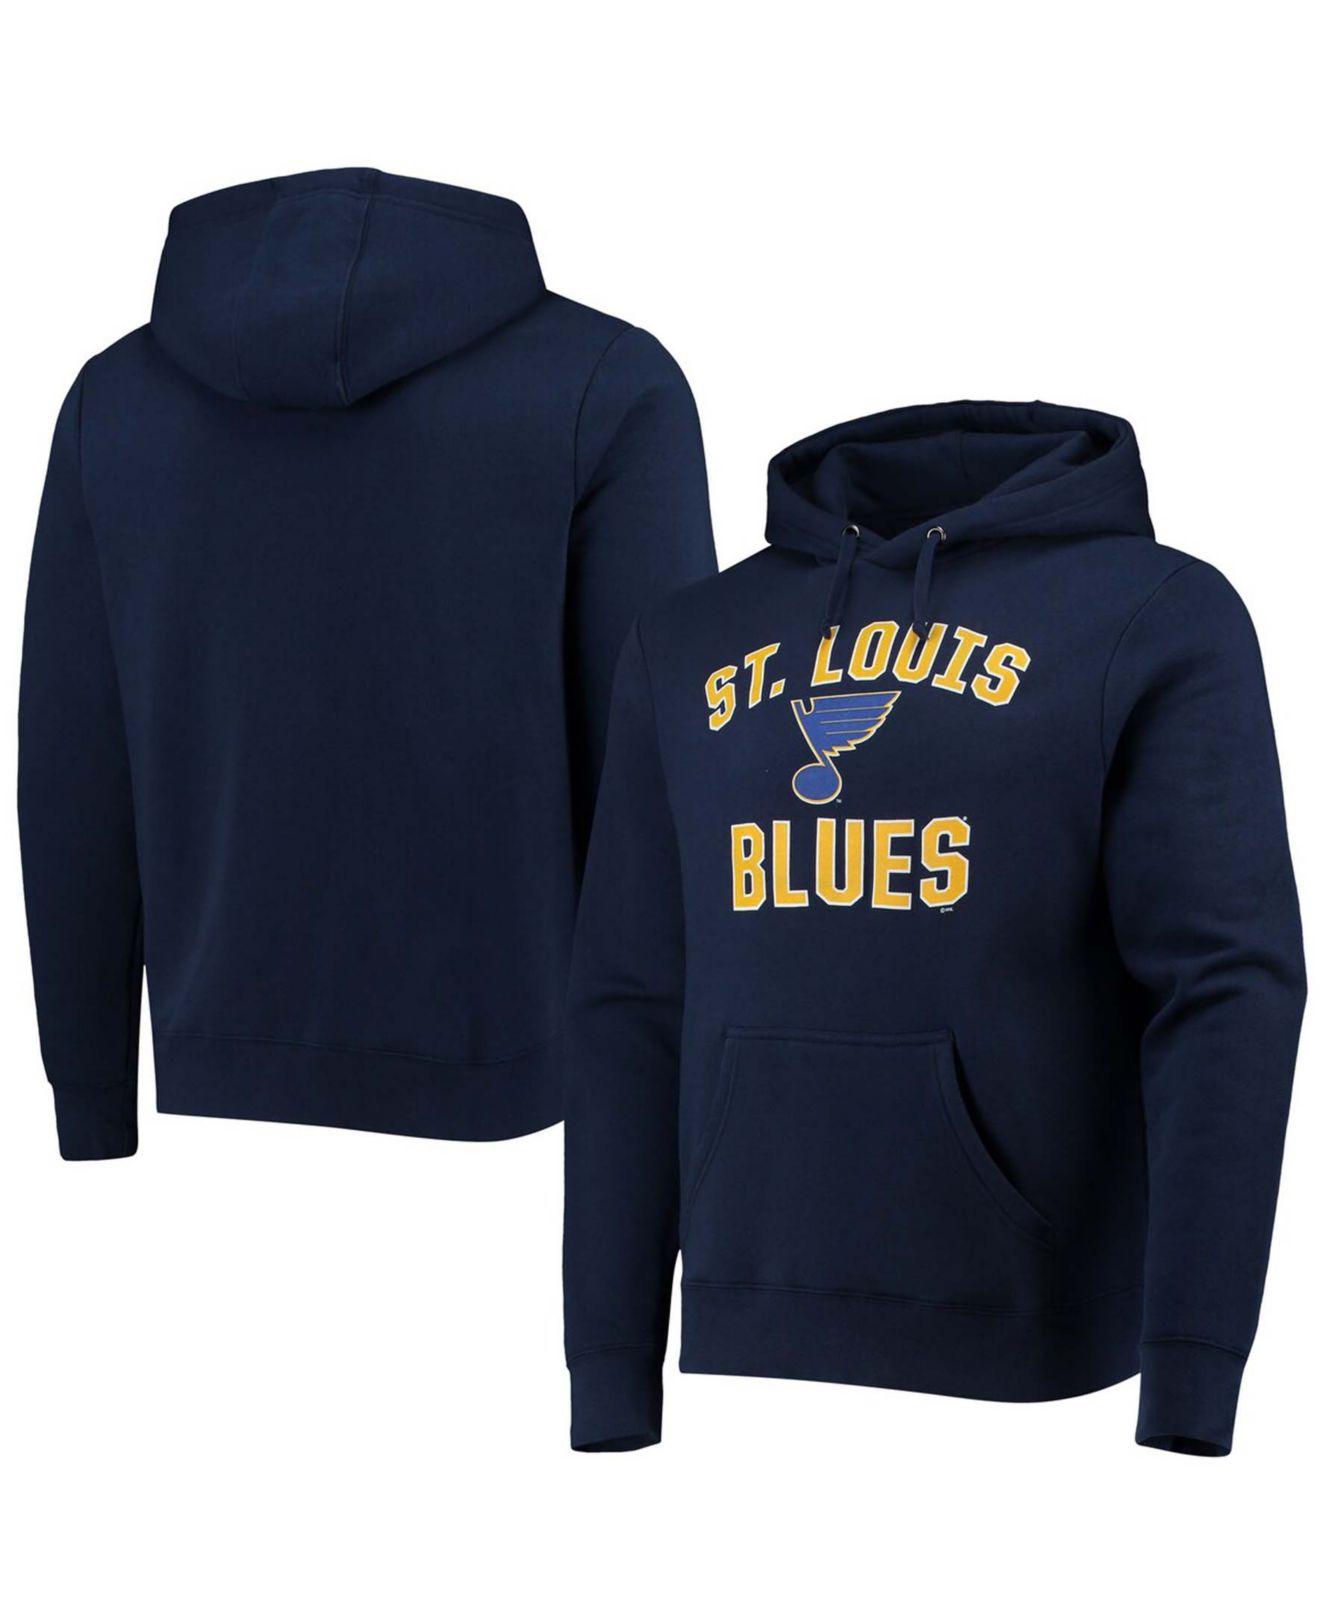 Men's Fanatics Branded Heathered Gray/Blue St. Louis Blues Block Party Classic Arch Signature Pullover Hoodie